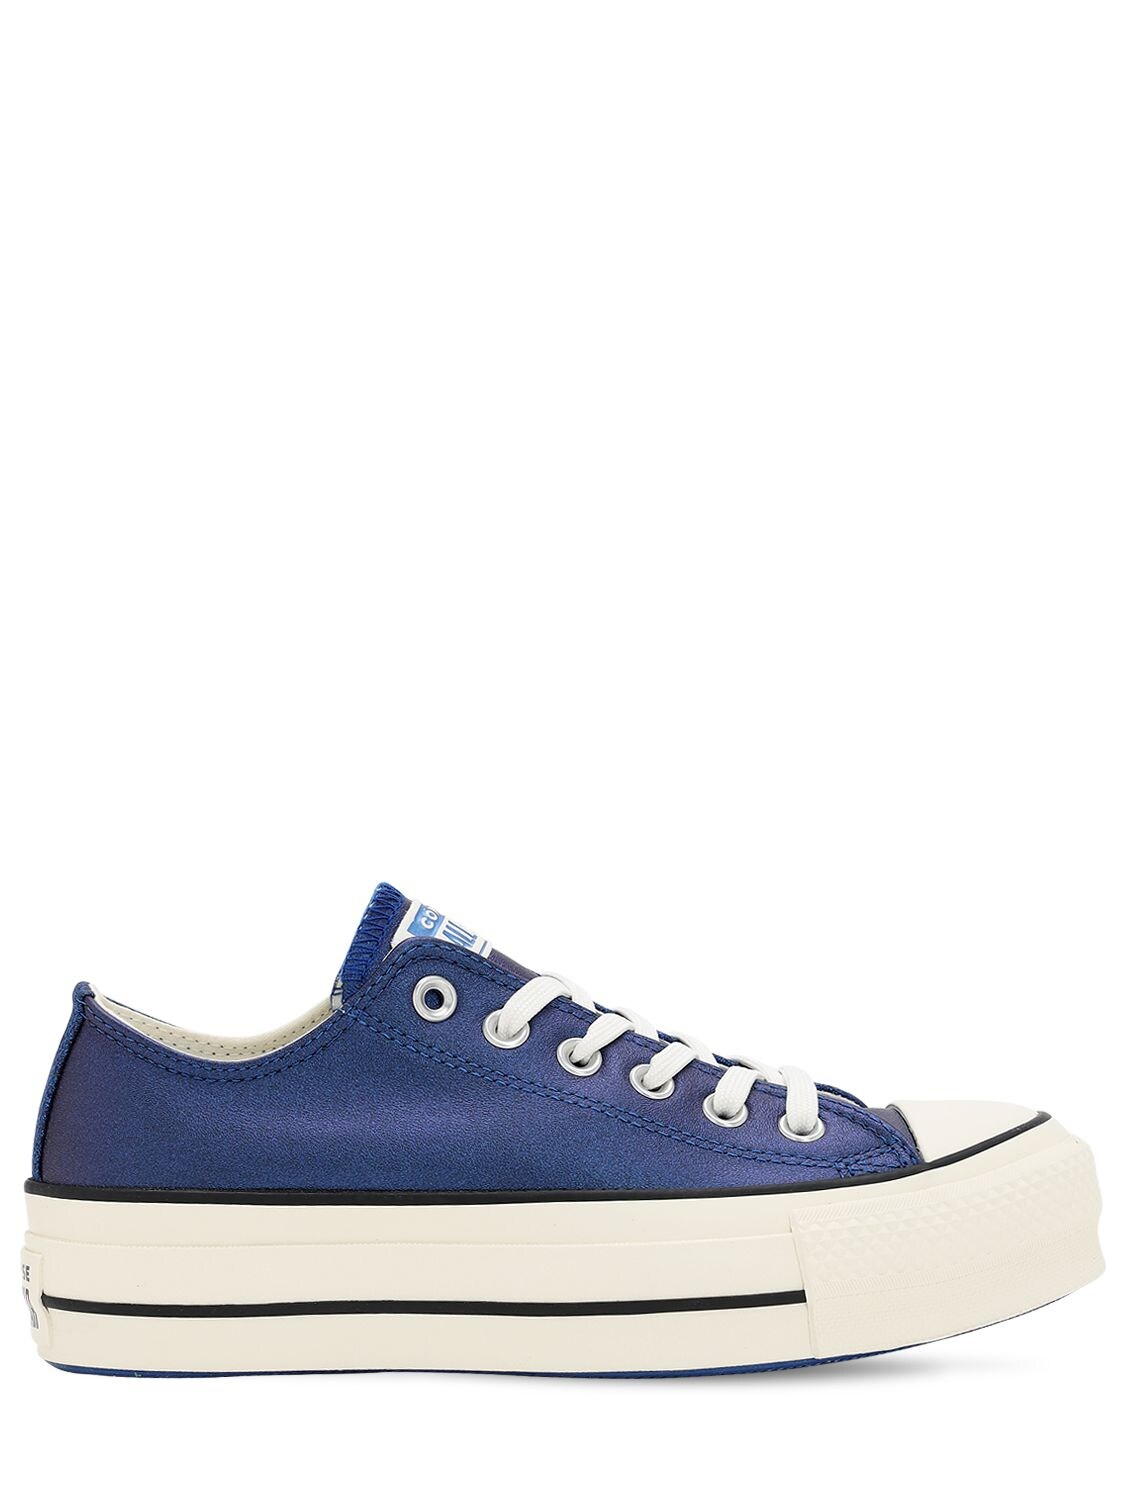 Converse Chuck Taylor All Star Lift Ox Sneakers In Blue